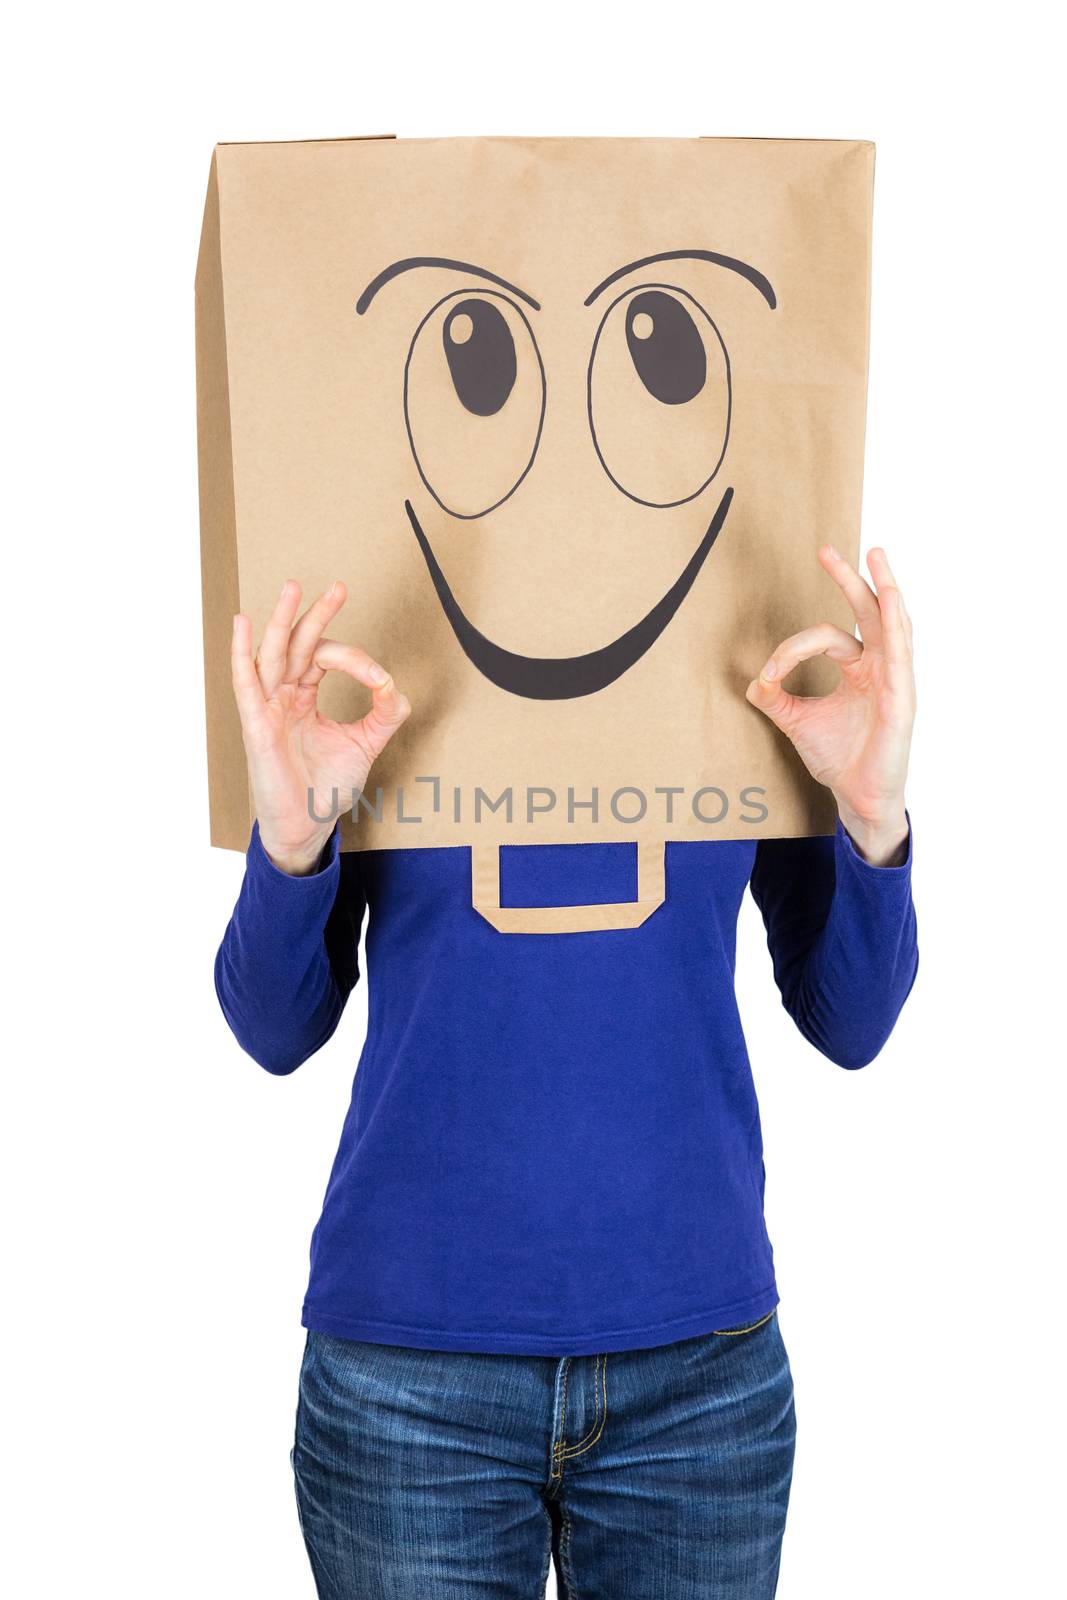 Happy smiling woman with paper bag on head by BenSchonewille